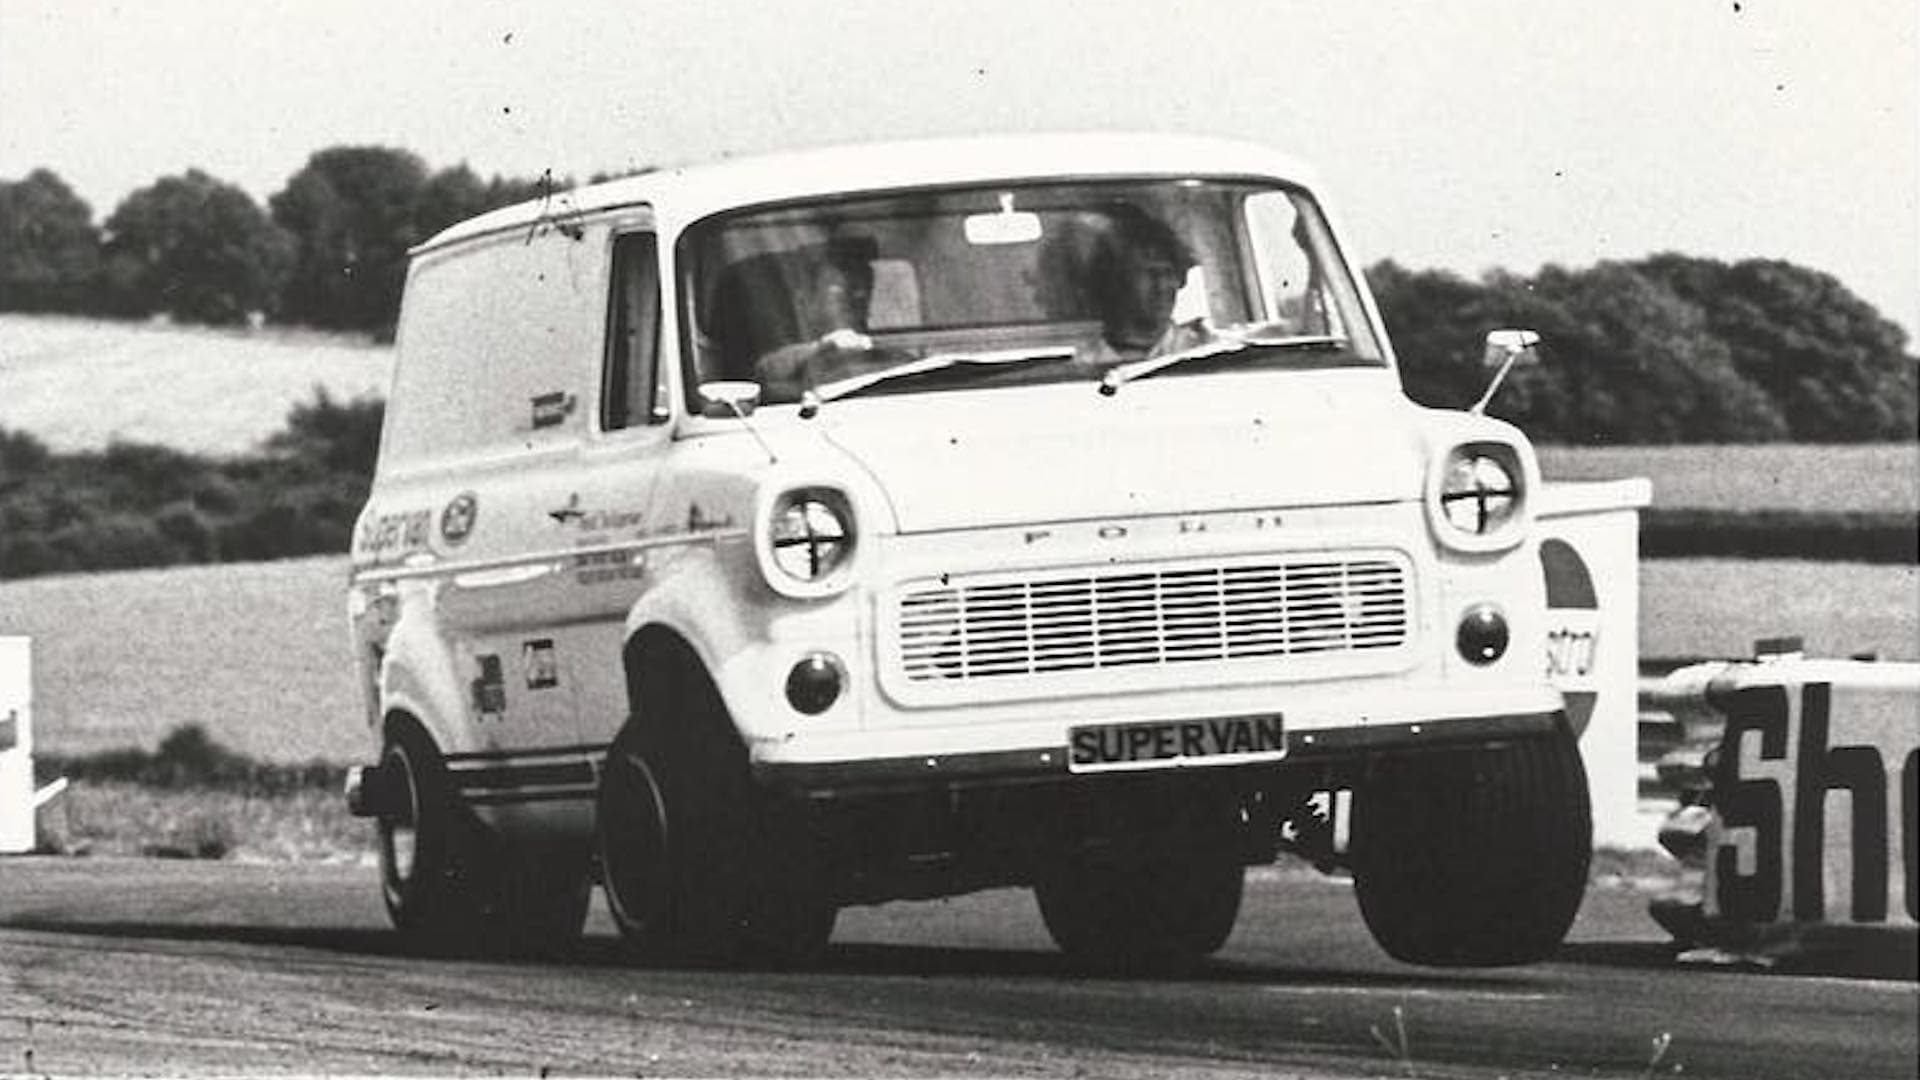 Ford GT40-Based ‘Supervan’ Was a Terrifying 435-HP Transit